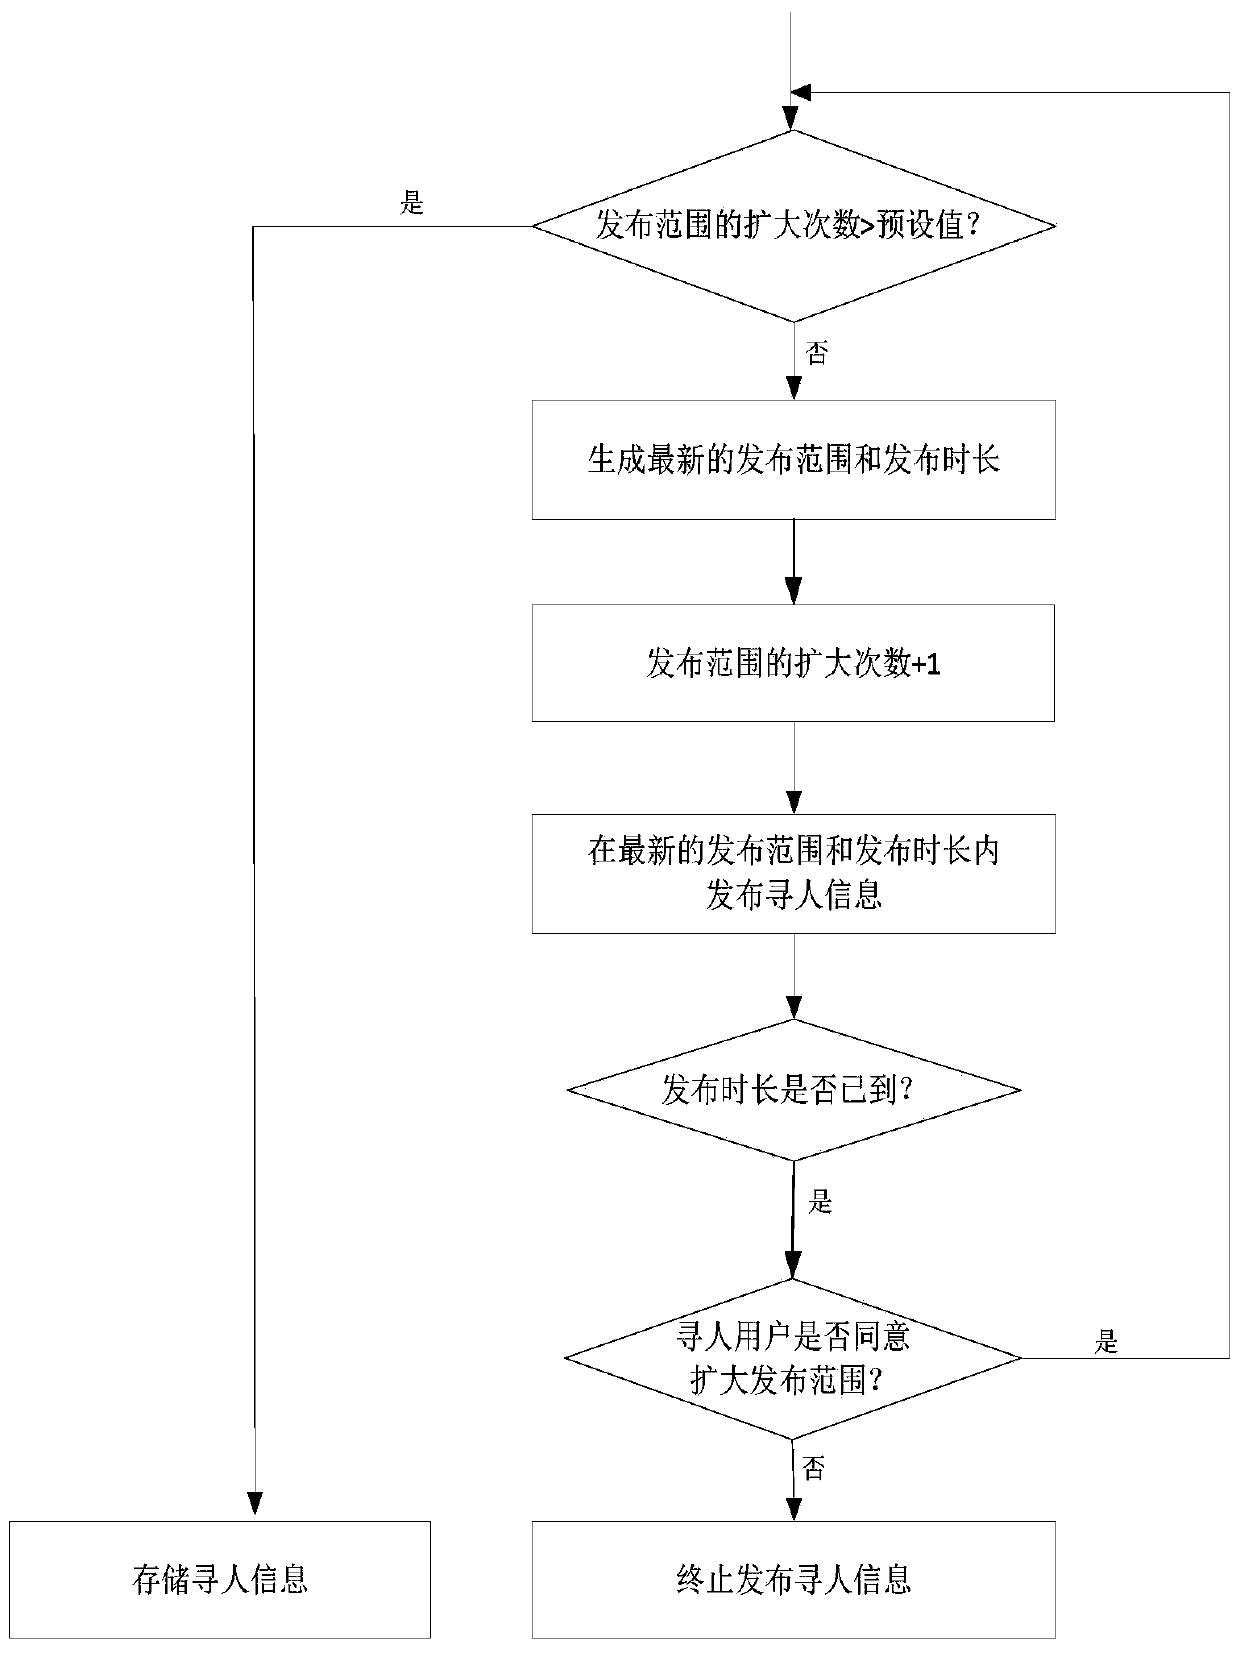 A person tracing system and method